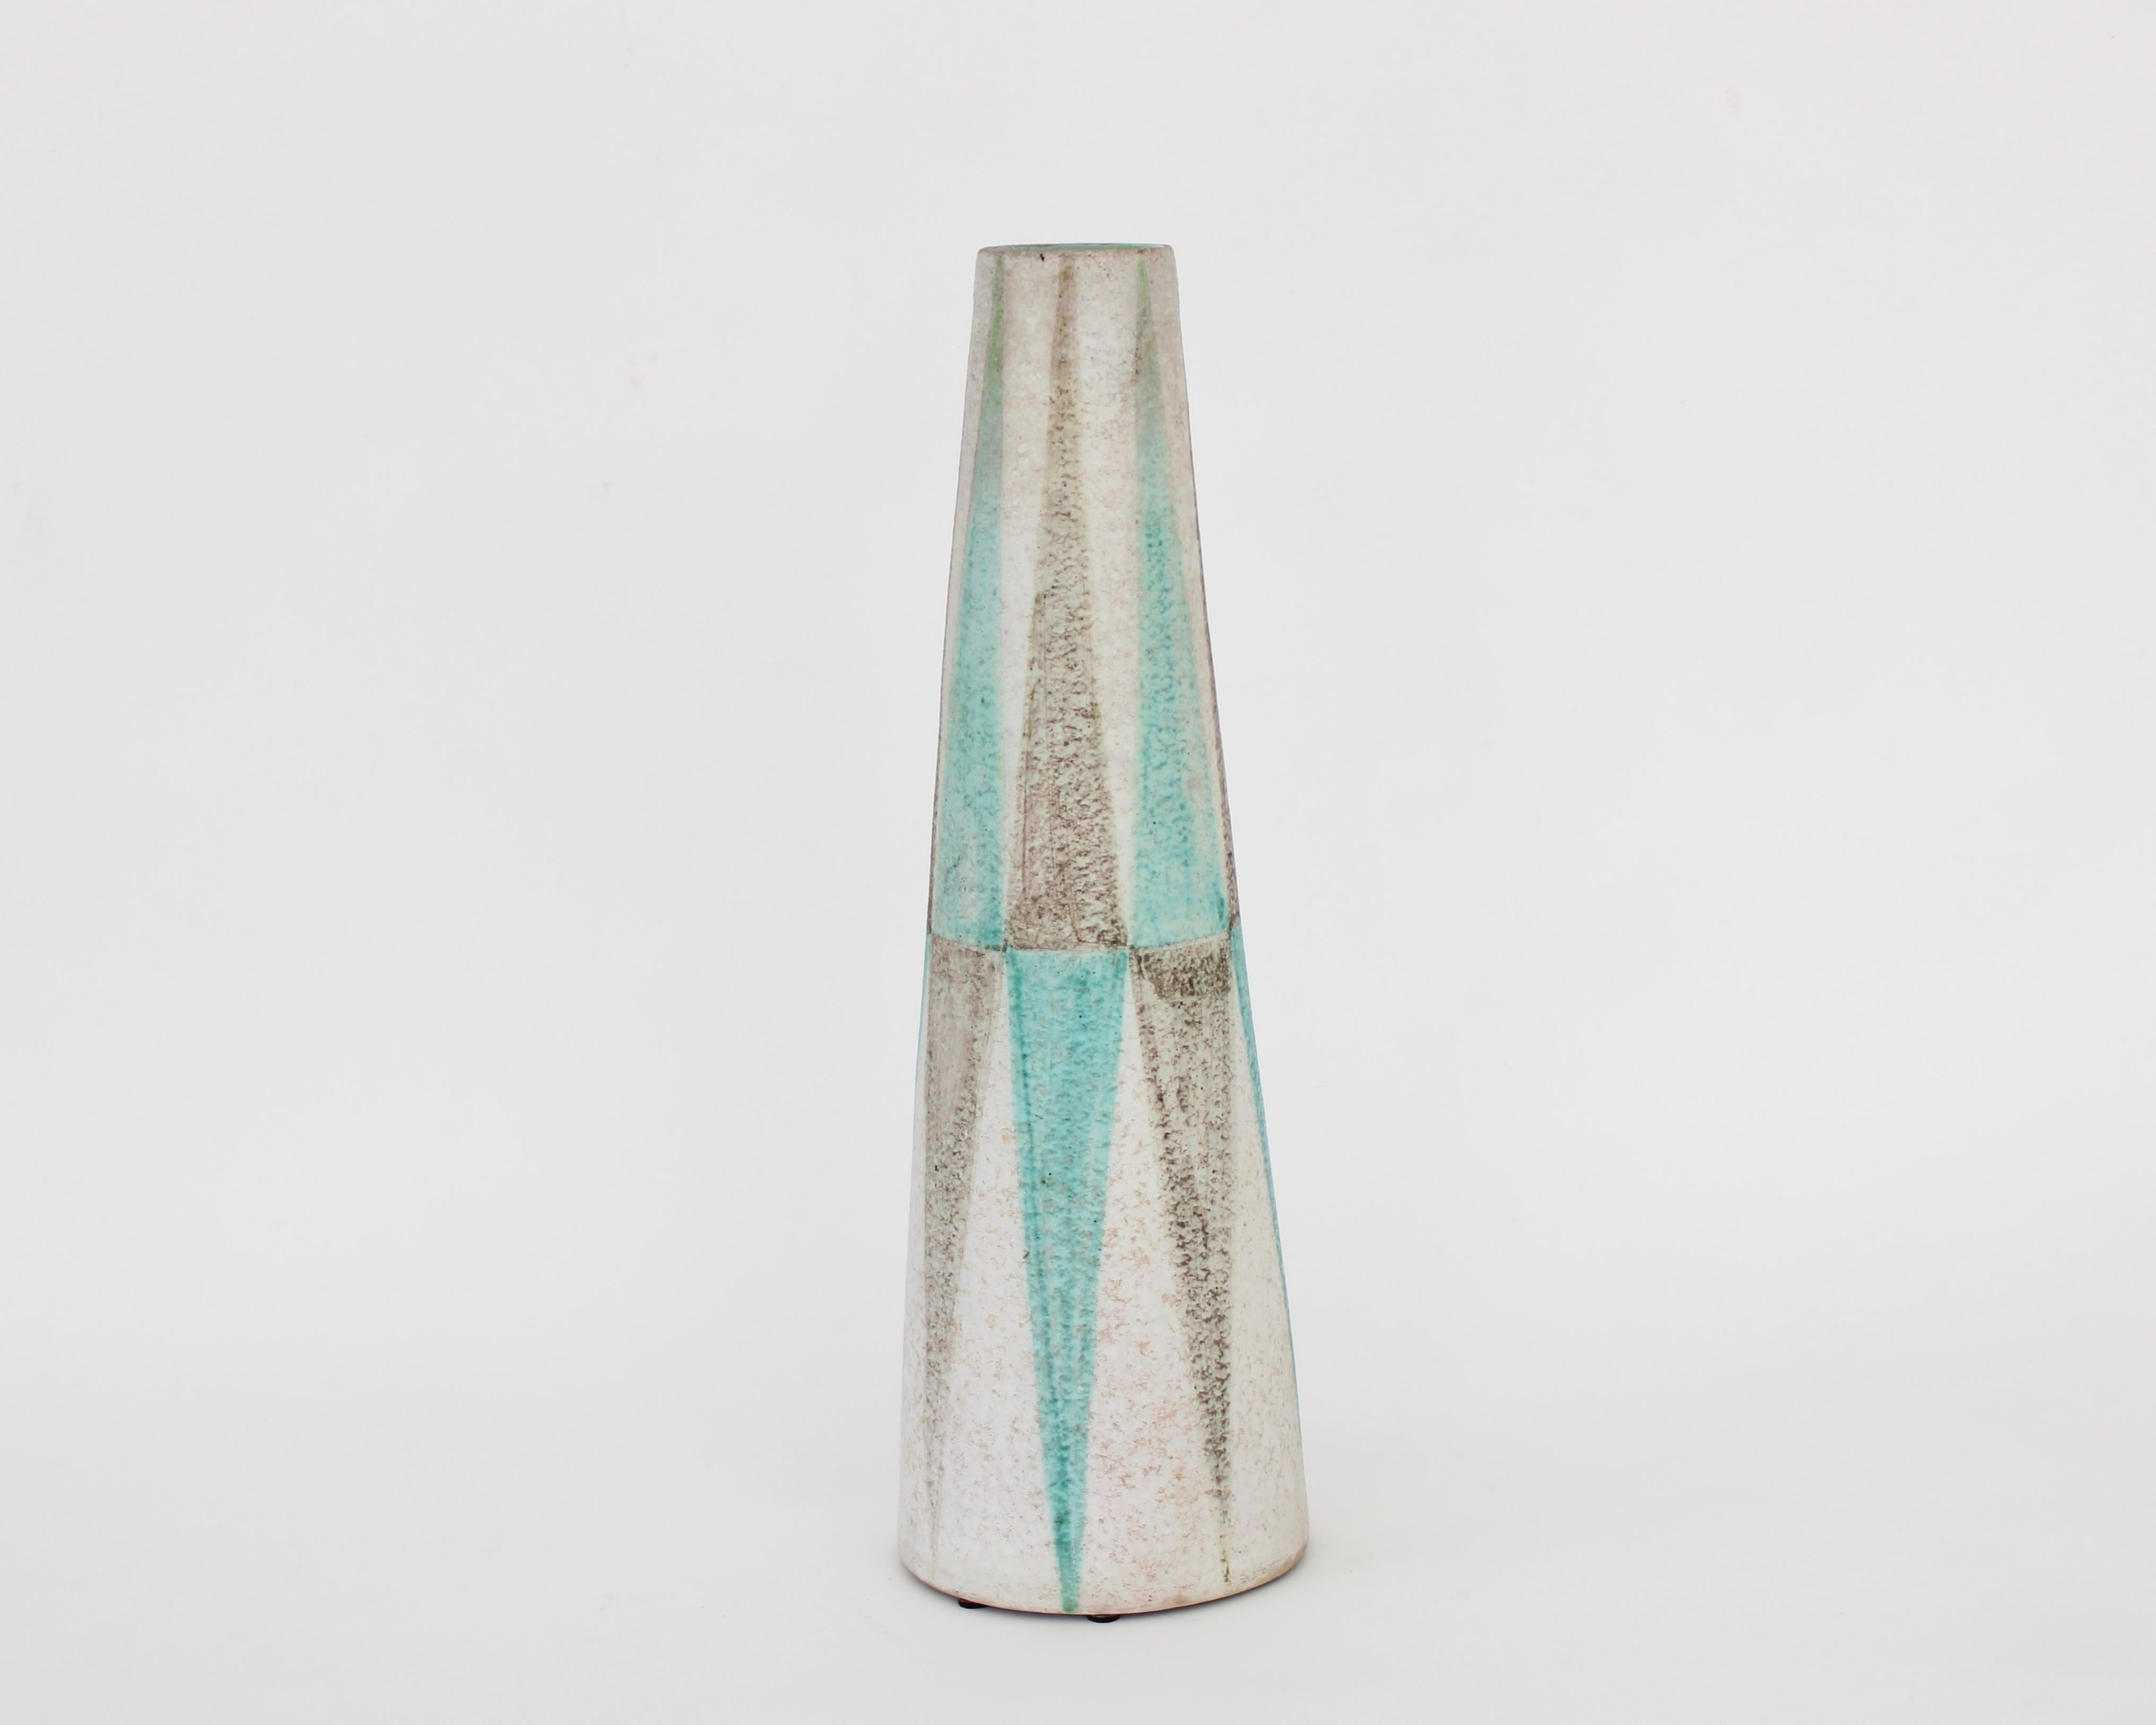 Italian ceramic vase for Raymor, most likely by Fantoni considering the amount of design work he did for Raymor and a faint trace of his signature on the base. 
Pale watery blue and brown gray glazes painted in a vertical decoration with a green